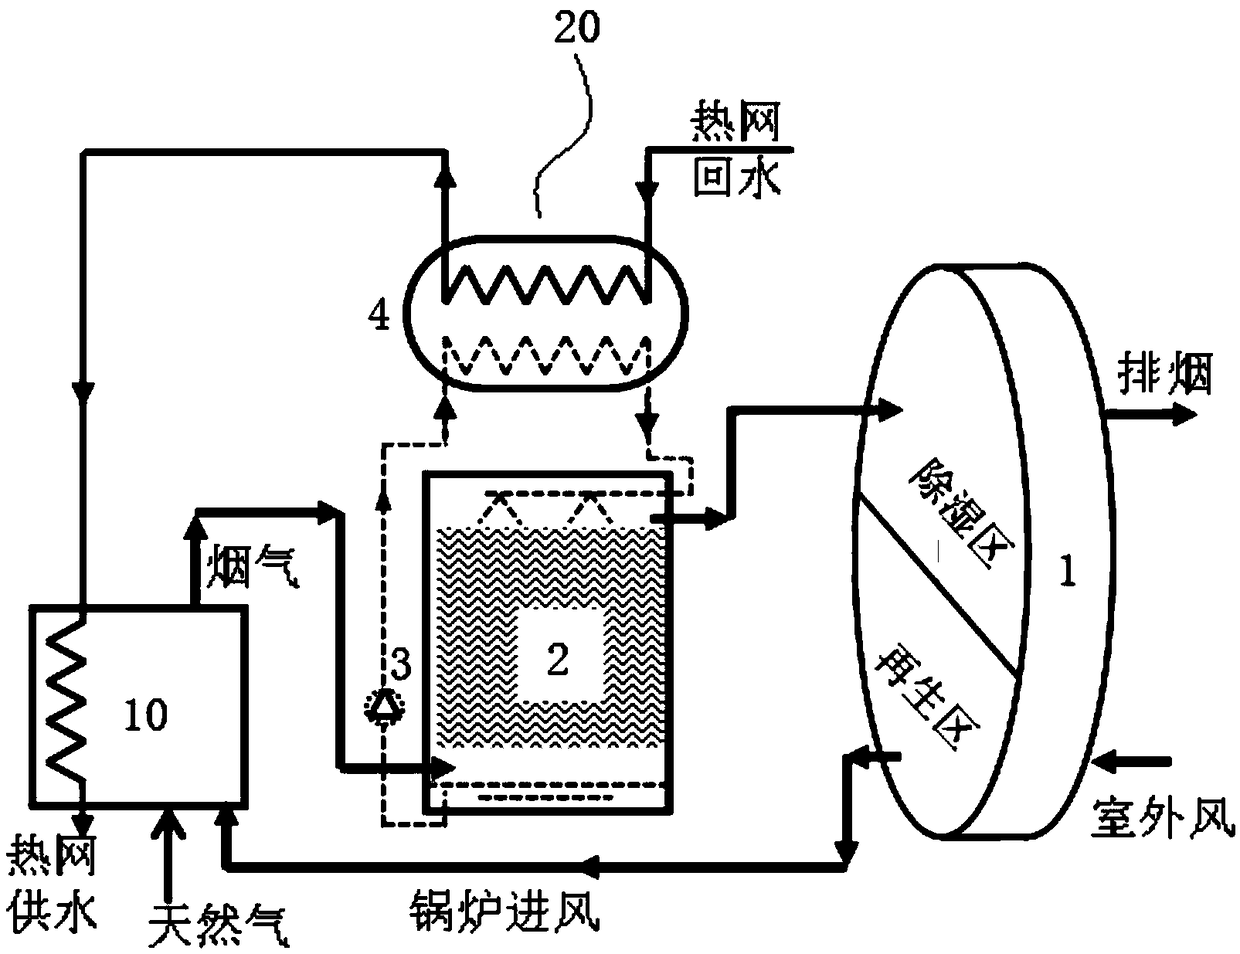 A boiler flue gas waste heat recovery device